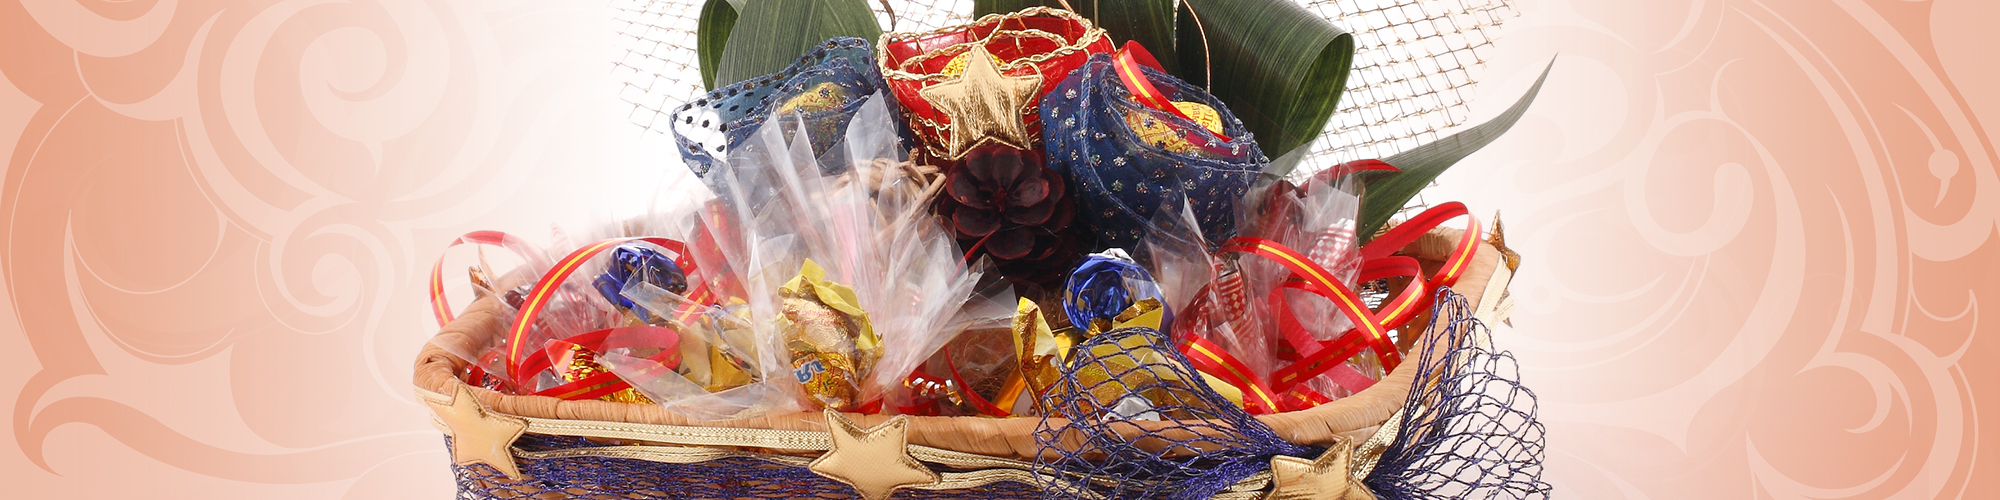 Customized gift hampers. | Customized gifts, Gift hampers, Gifts